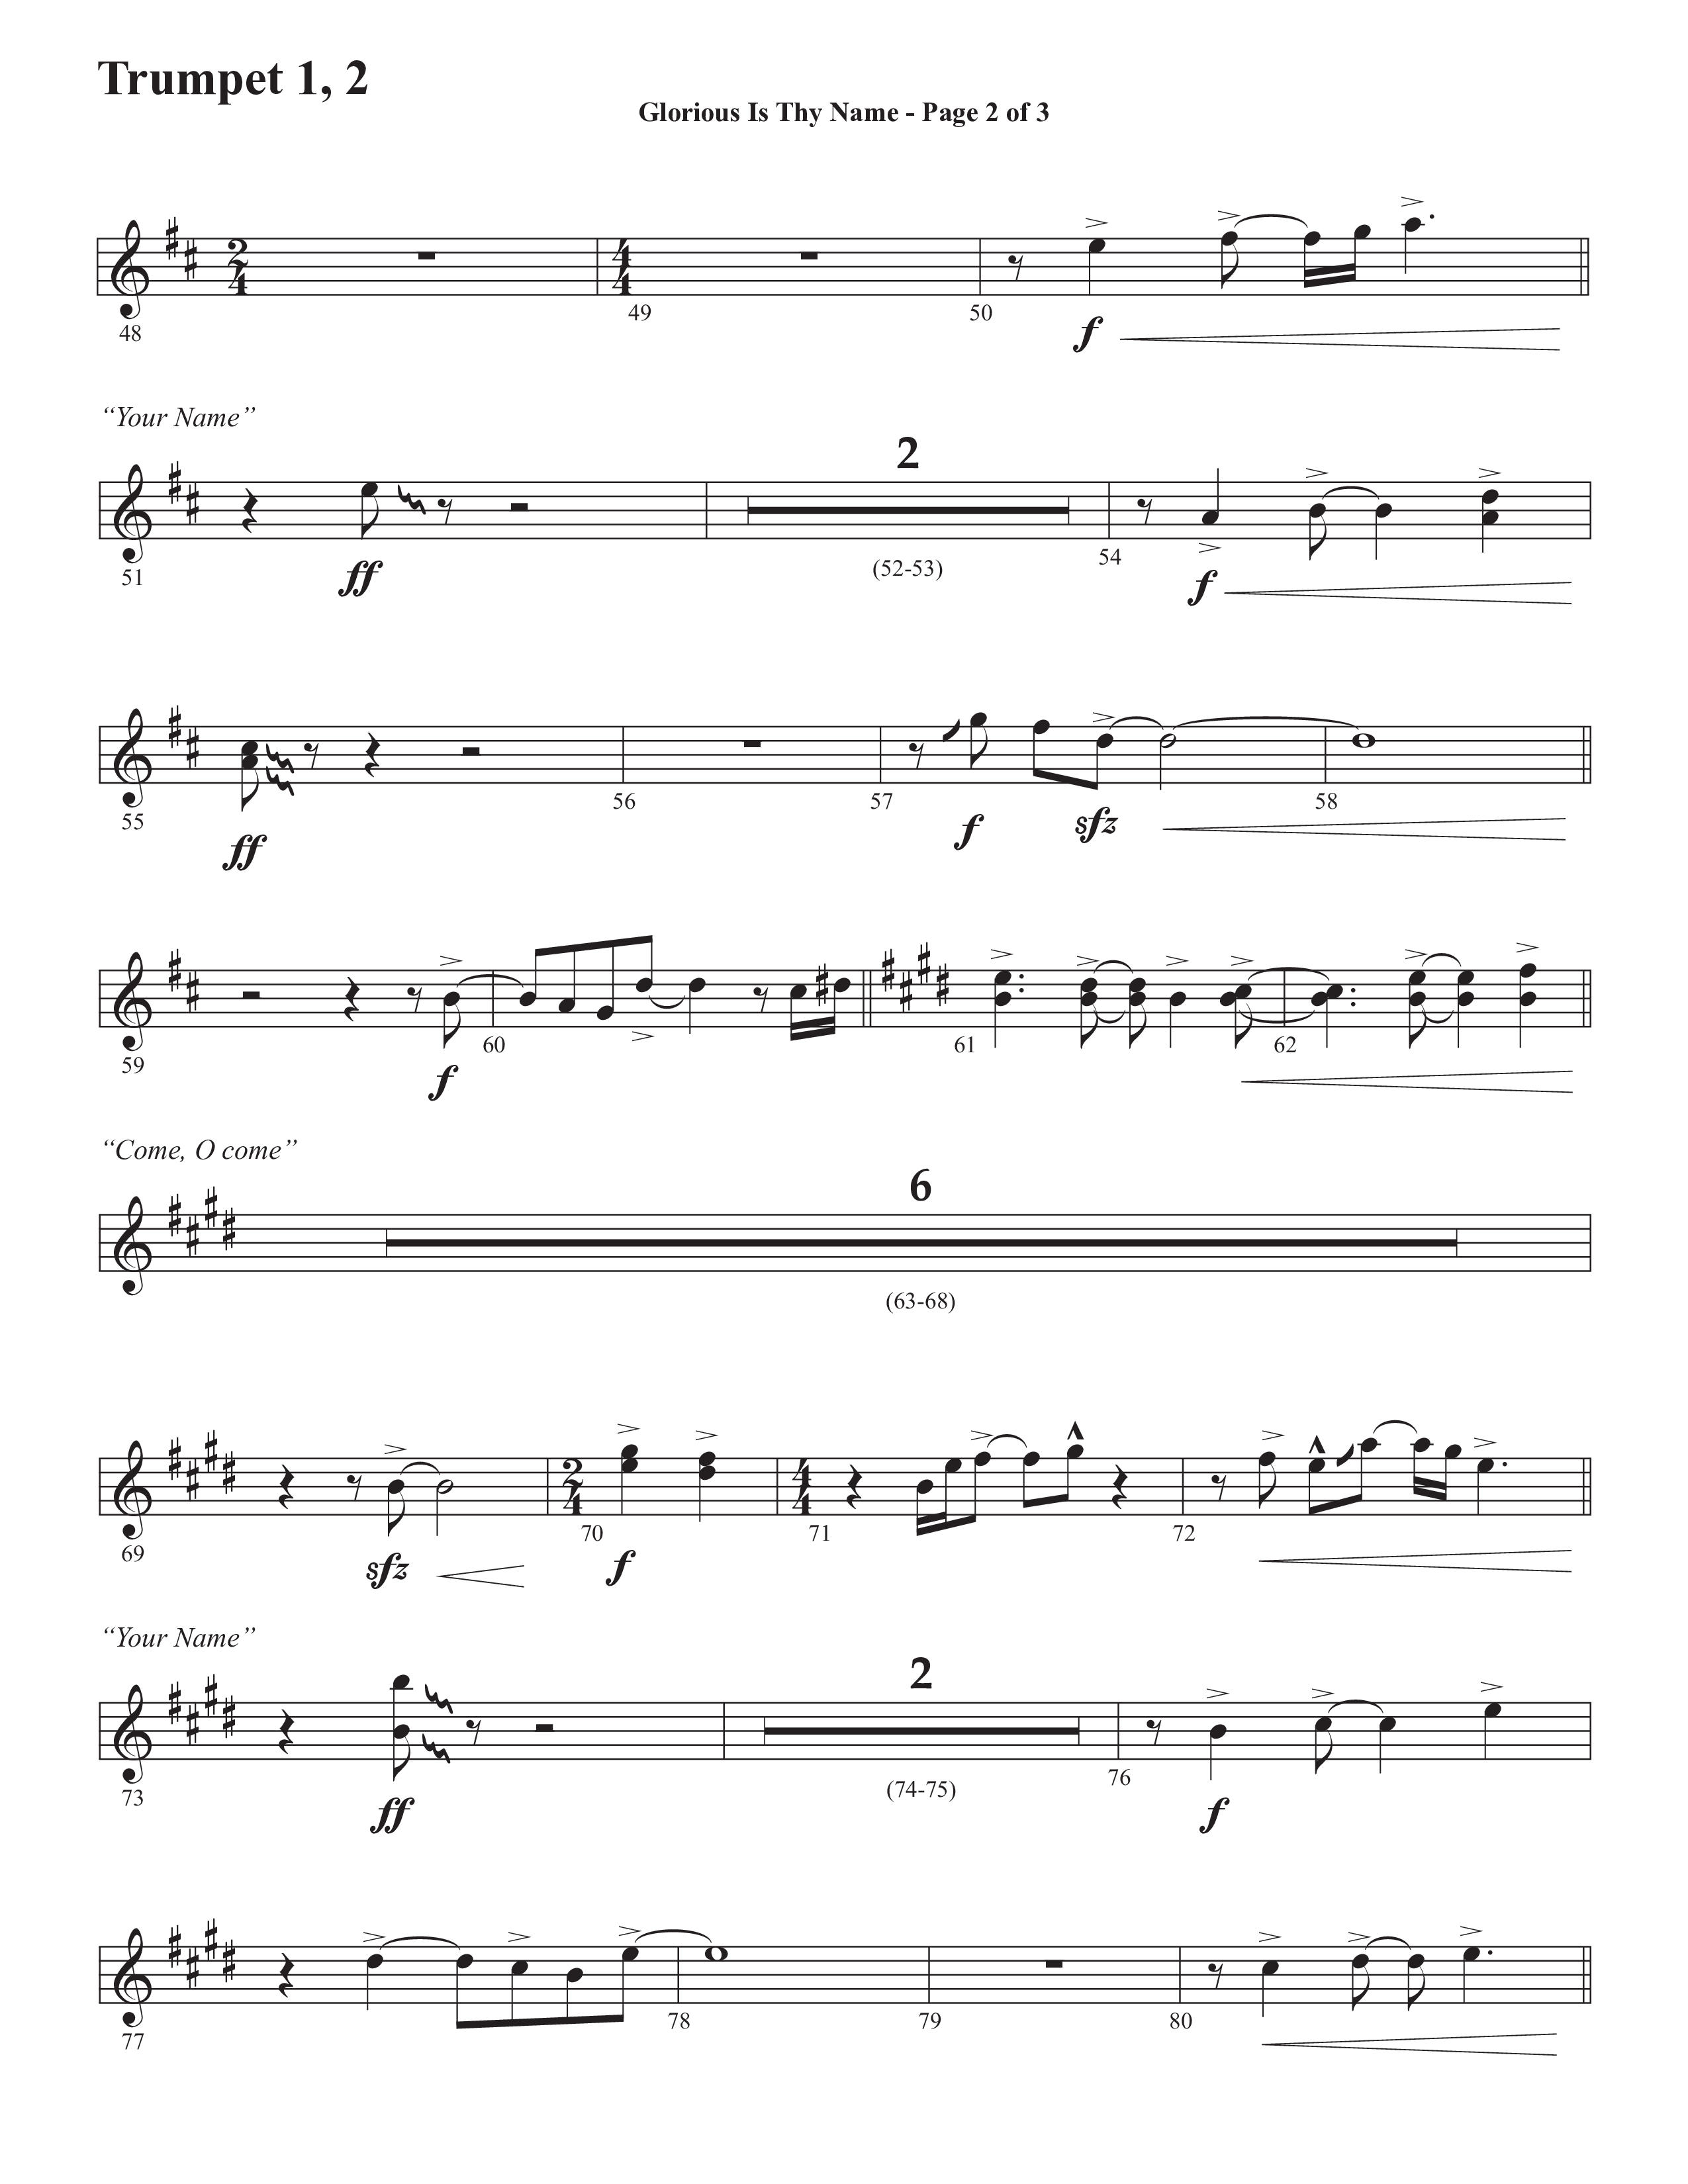 Glorious Is Thy Name (with Your Name) (Choral Anthem SATB) Trumpet 1,2 (Semsen Music / Arr. John Bolin / Orch. Cliff Duren)